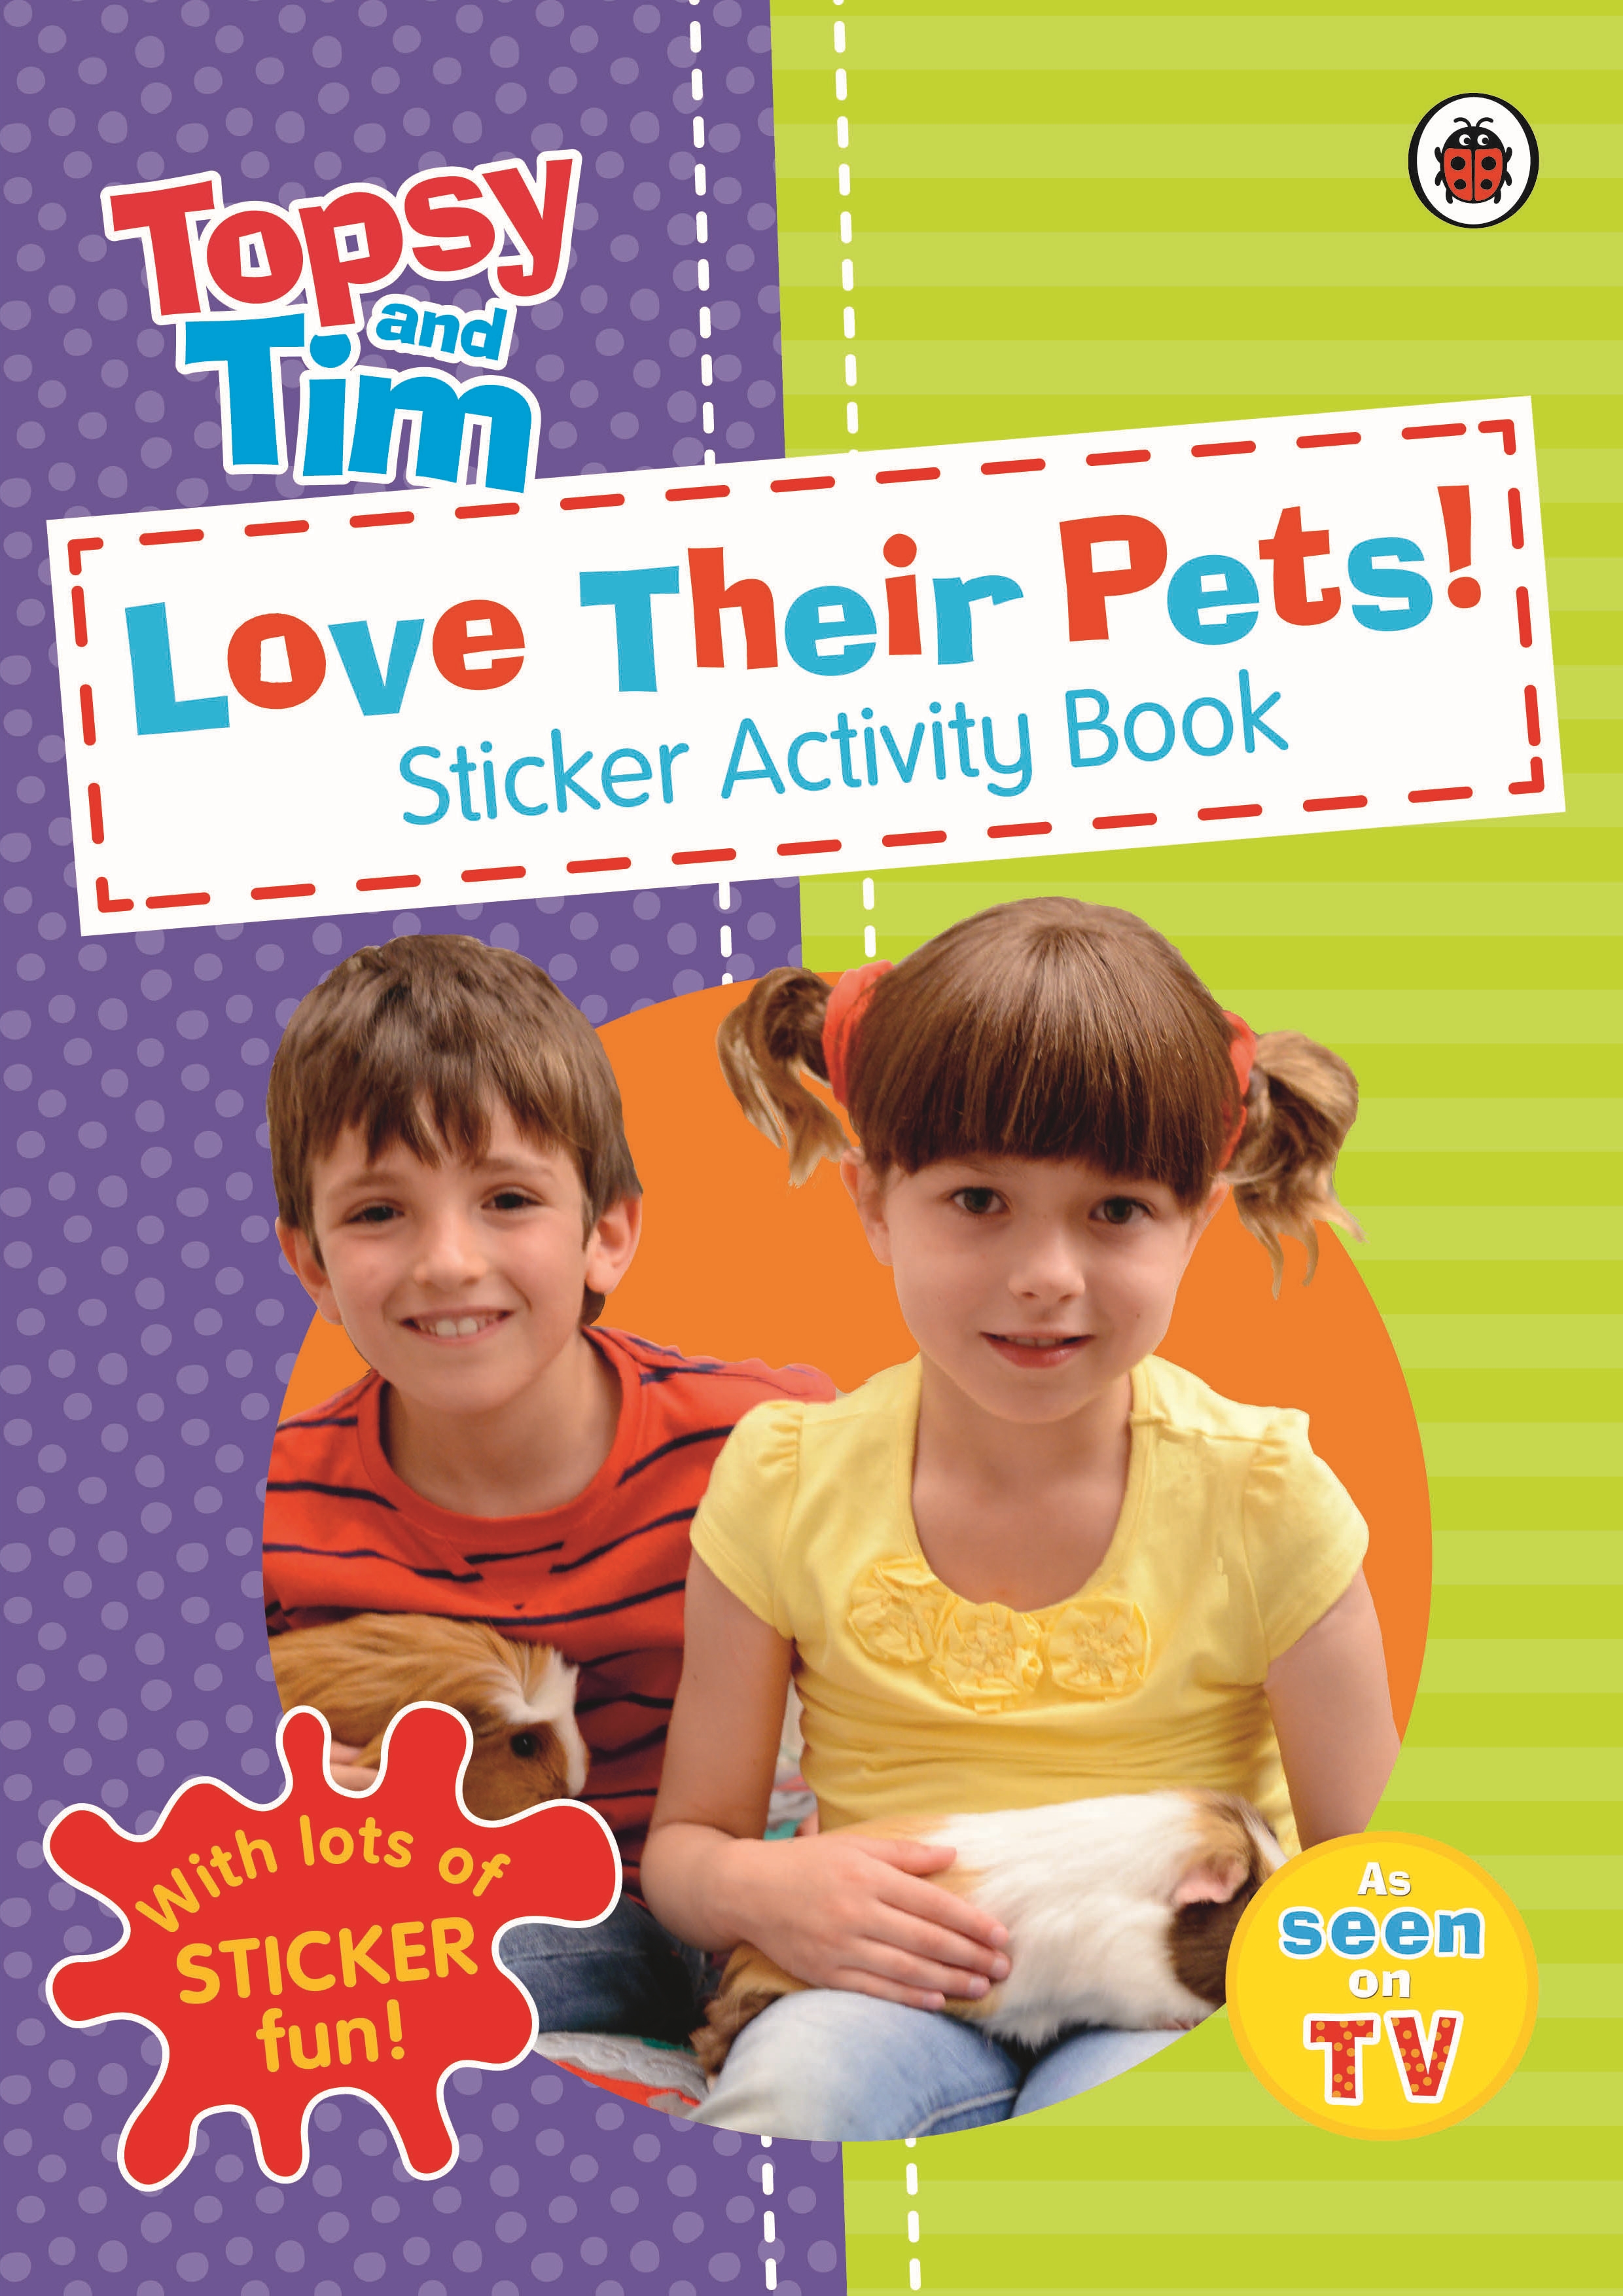 Topsy and Tim Love their pats!